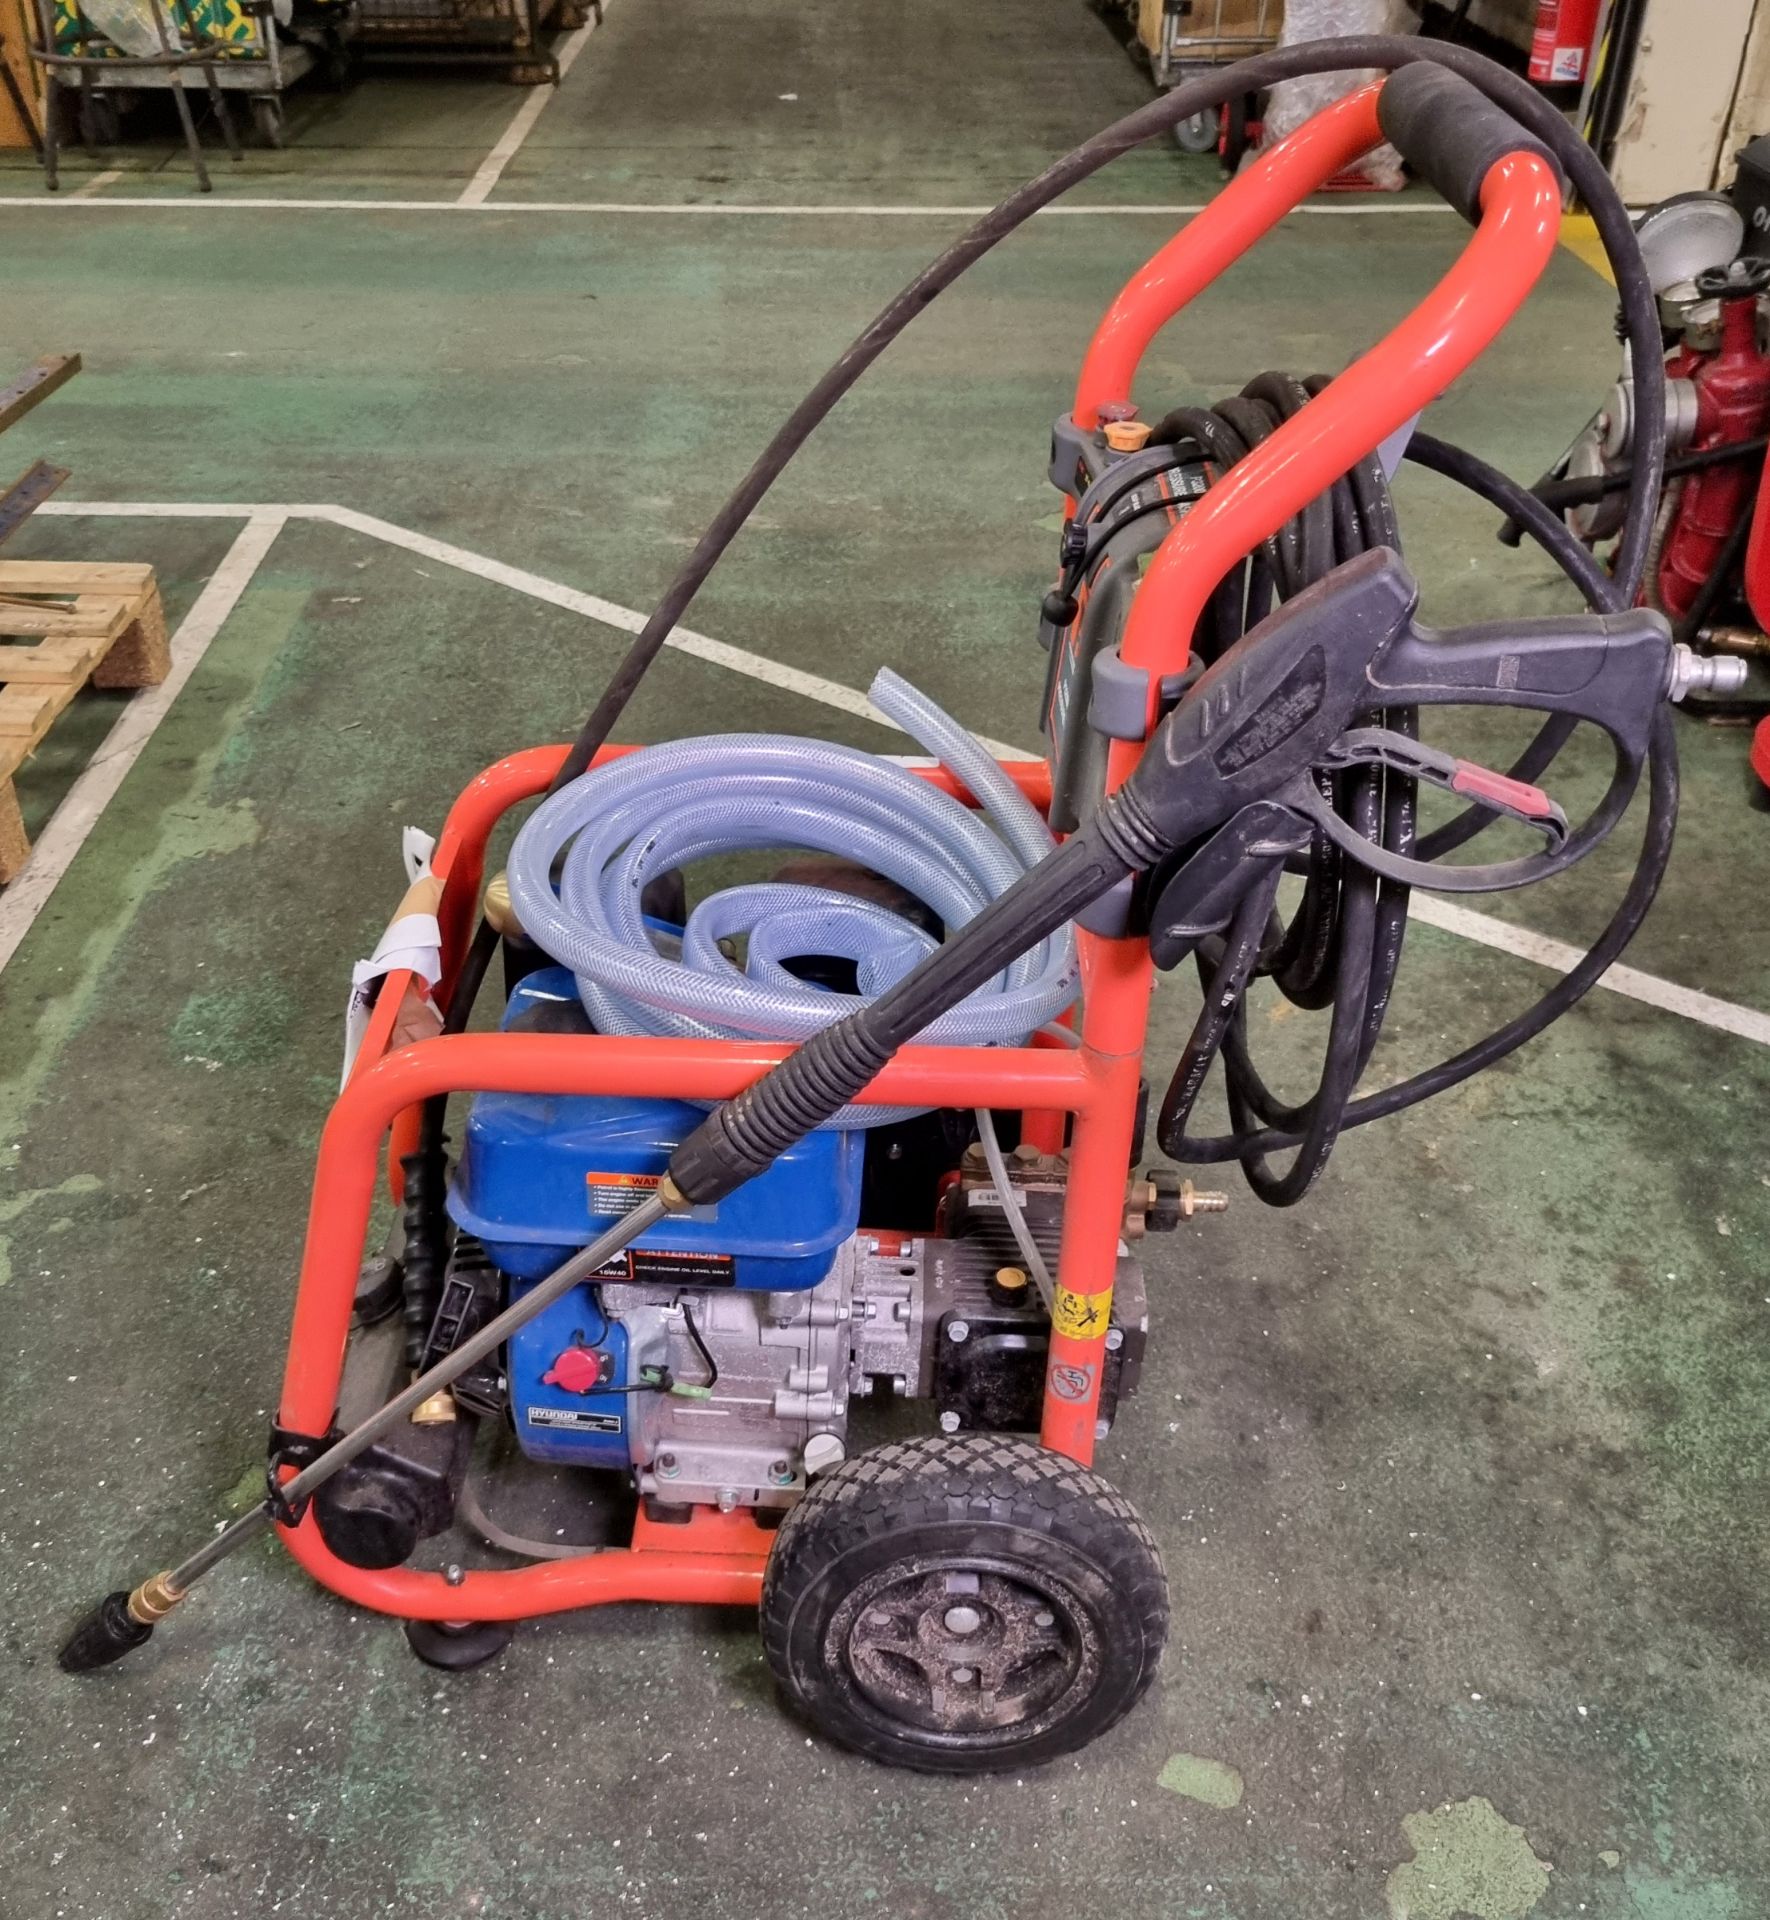 Position One Power Equipment commercial petrol pressure washer with Hyundai engine - details in desc